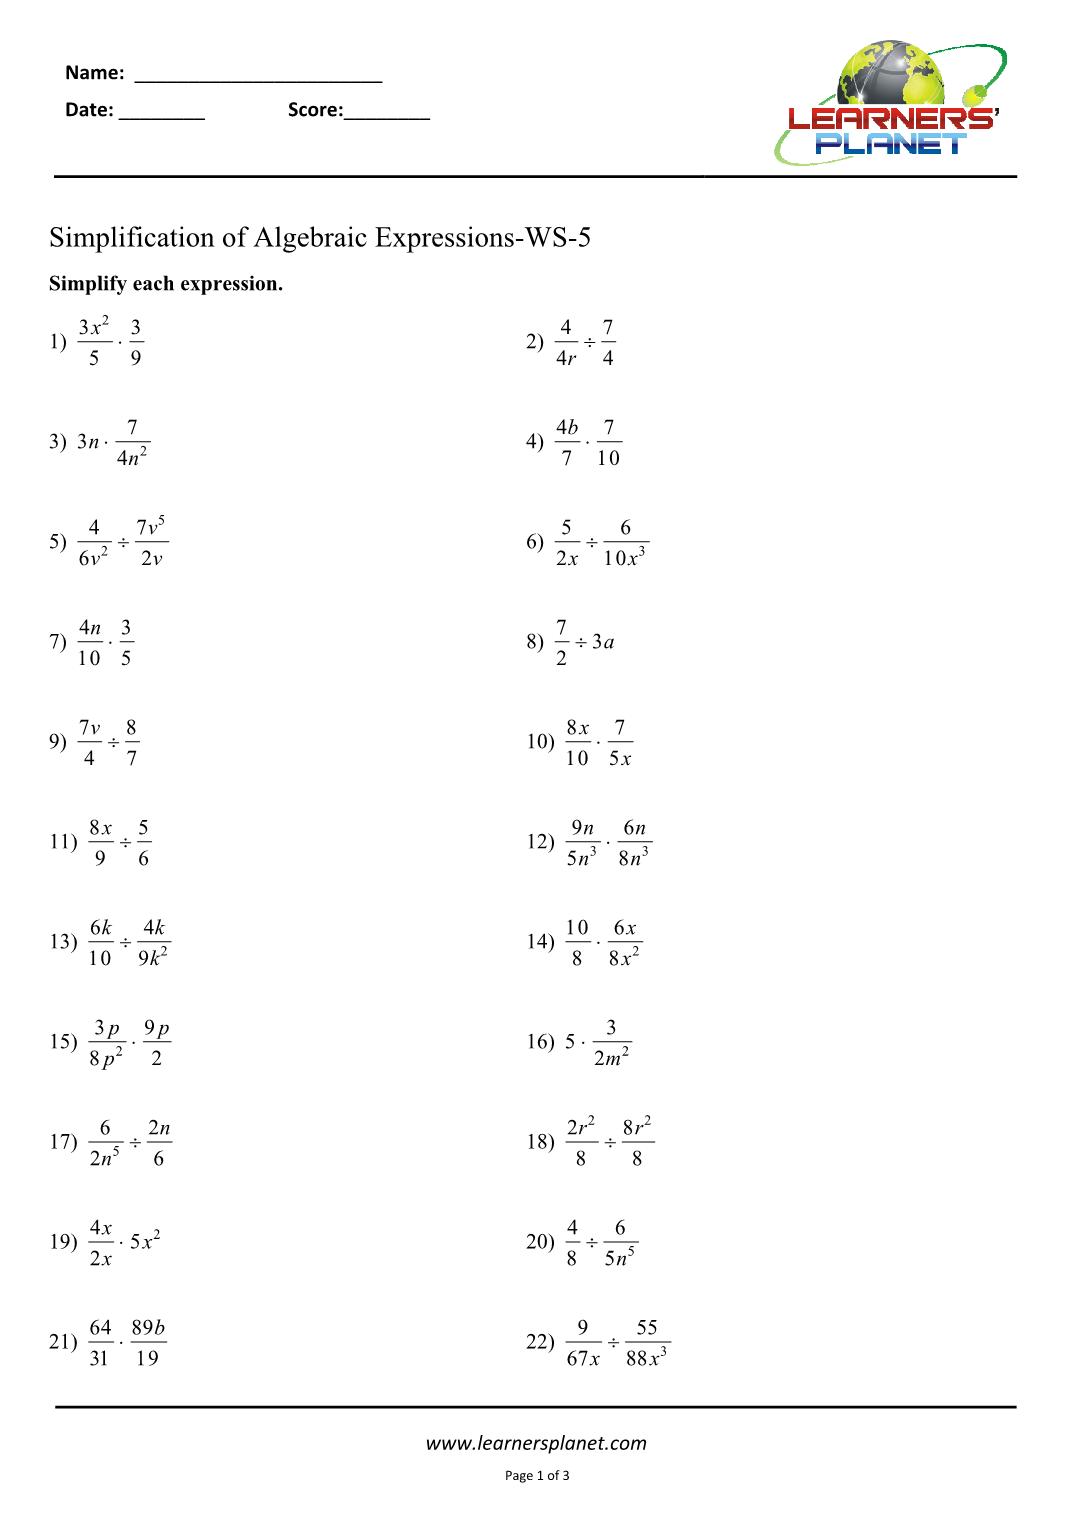 Math worksheets for simplifying expressions class 21  Learners